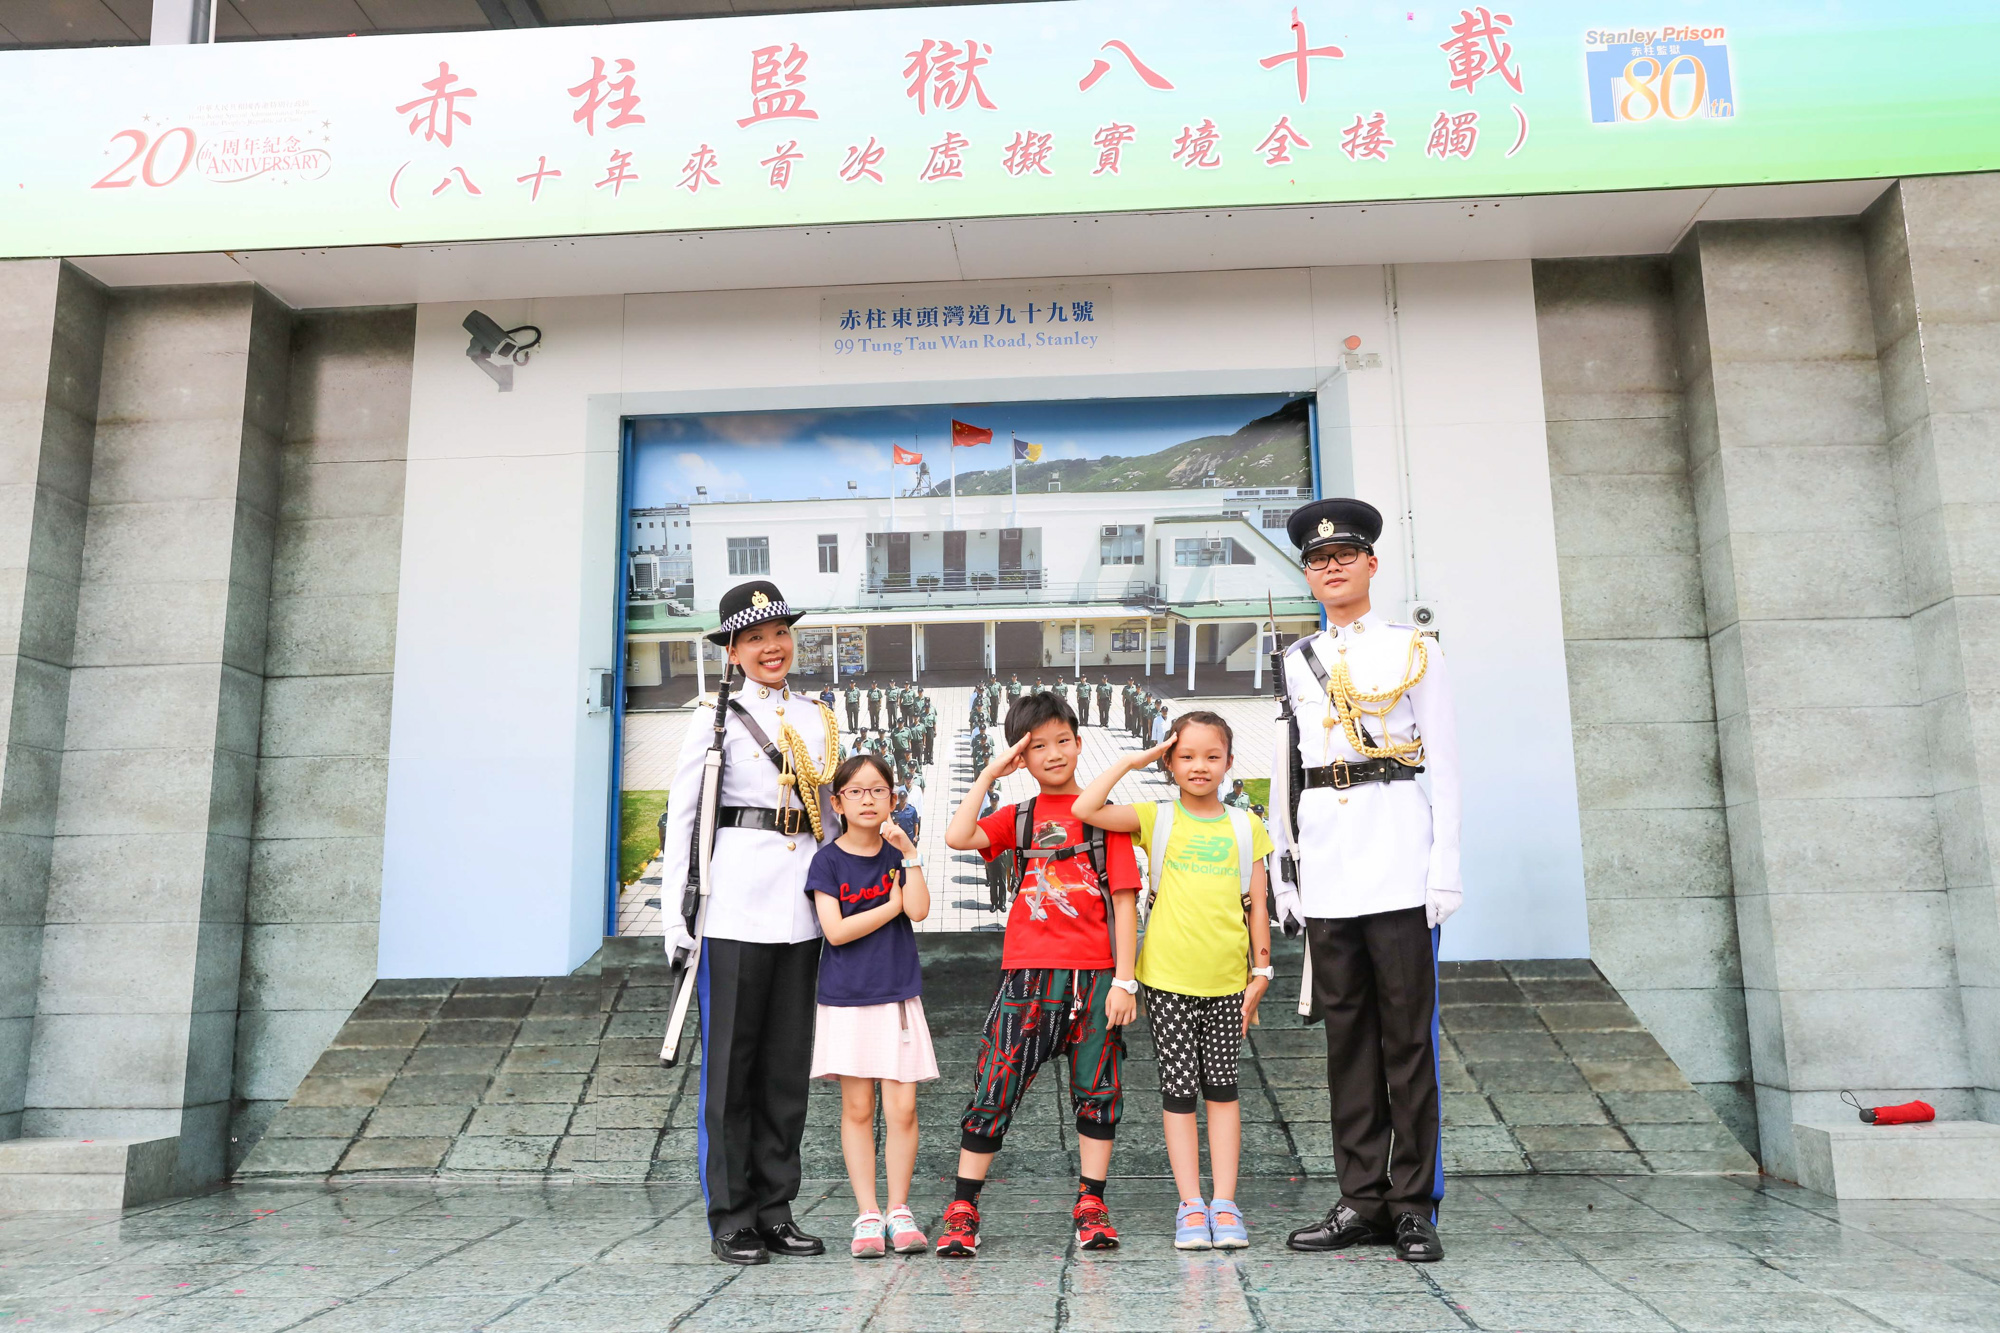 The Stanley Prison 80th Anniversary Open Day was held at the Staff Training Institute and the Hong Kong Correctional Services Museum.